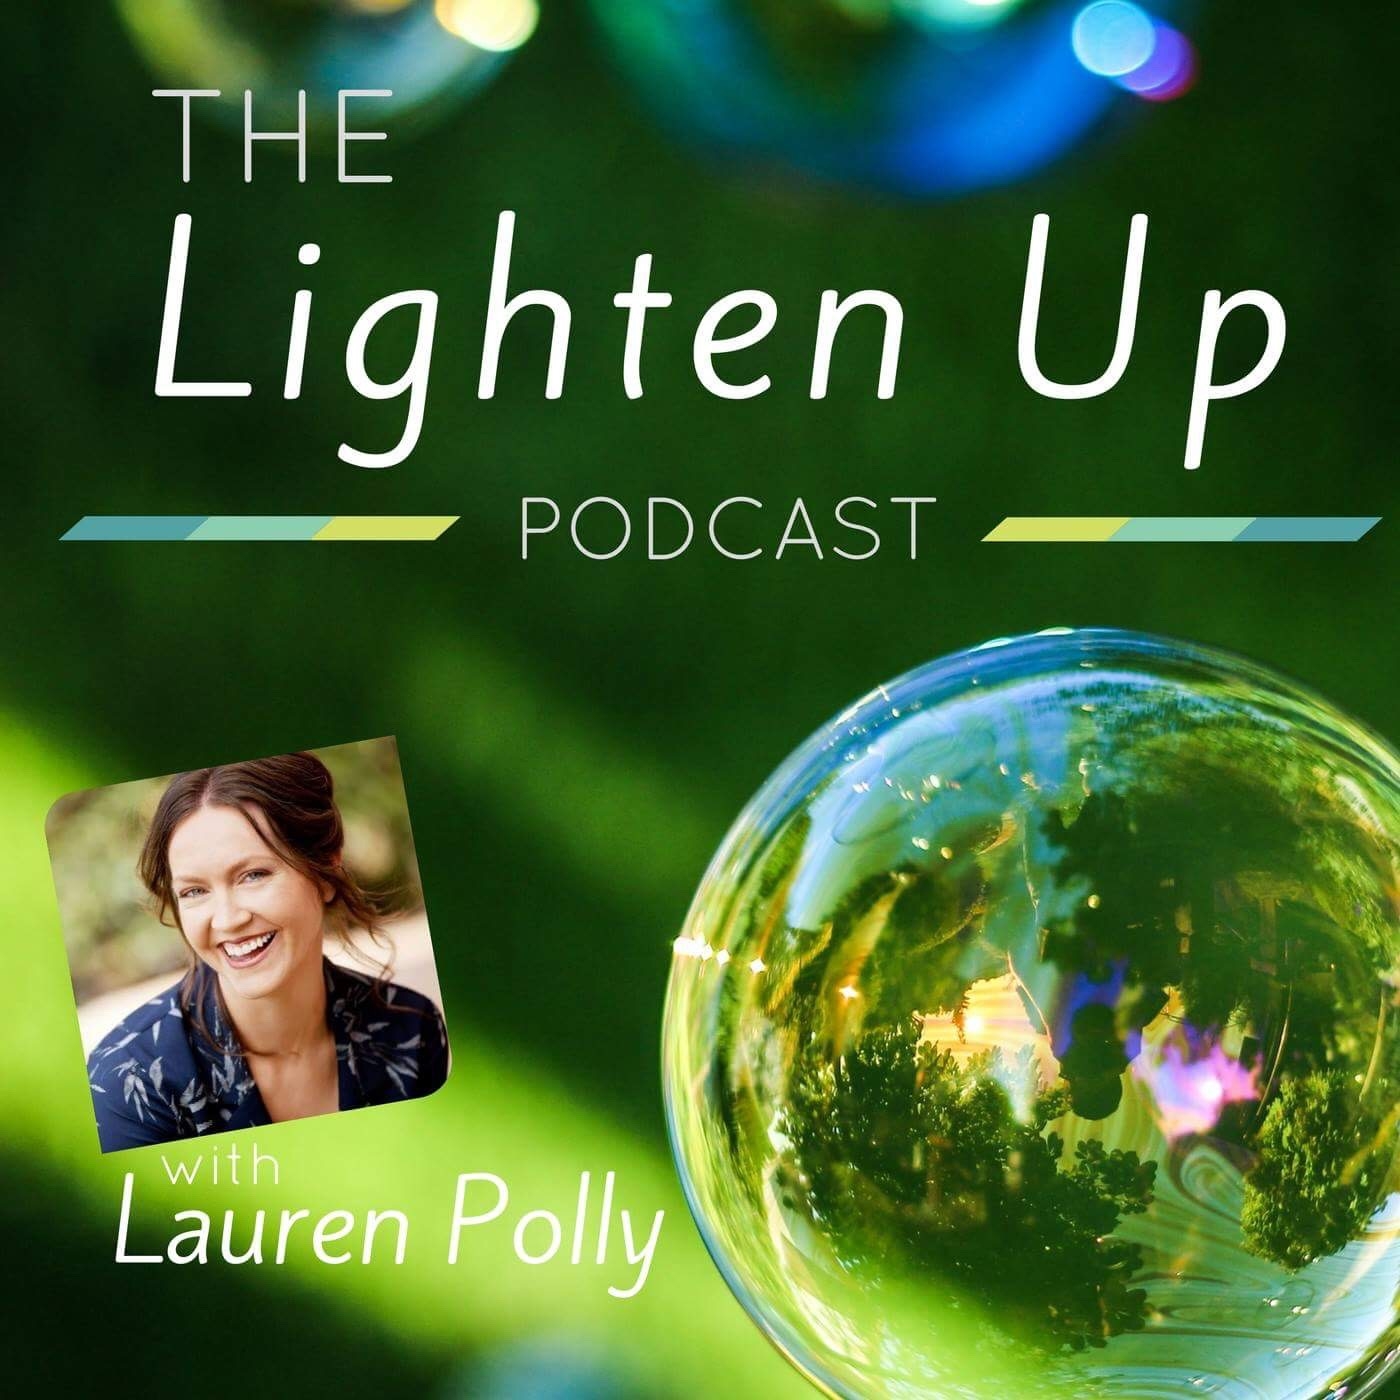 Lauren Polly "The Lighten Up Podcast Launch Day" on The Erica Glessing Show Podcast #2092